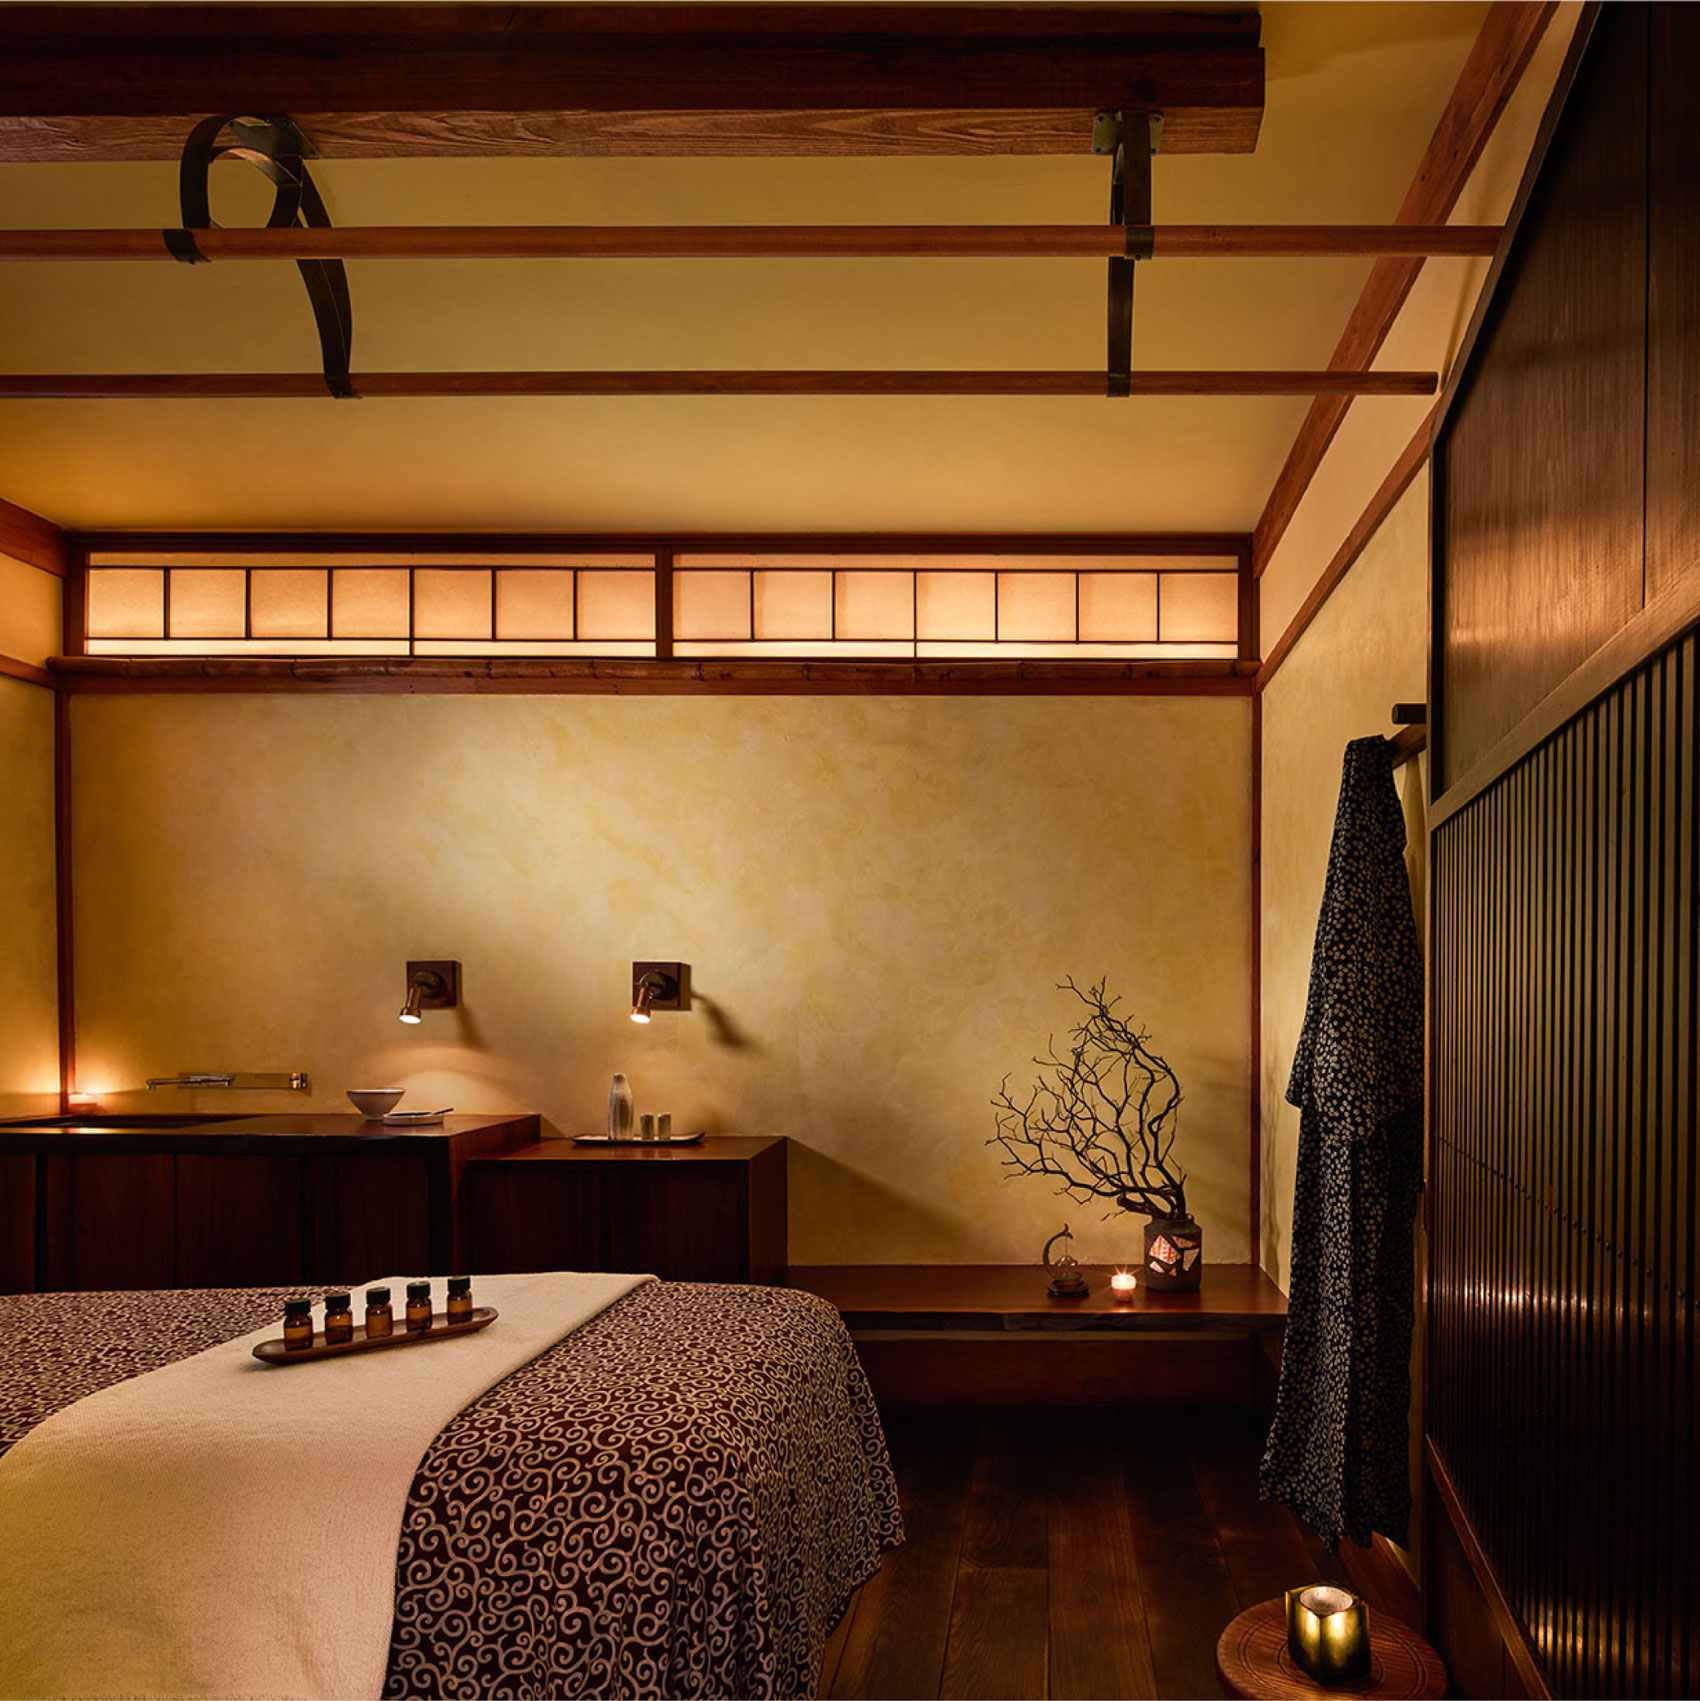 A treatment room inside the Shibui Spa. Tranquil decor, a treatment bed and robe hanging on the wall.